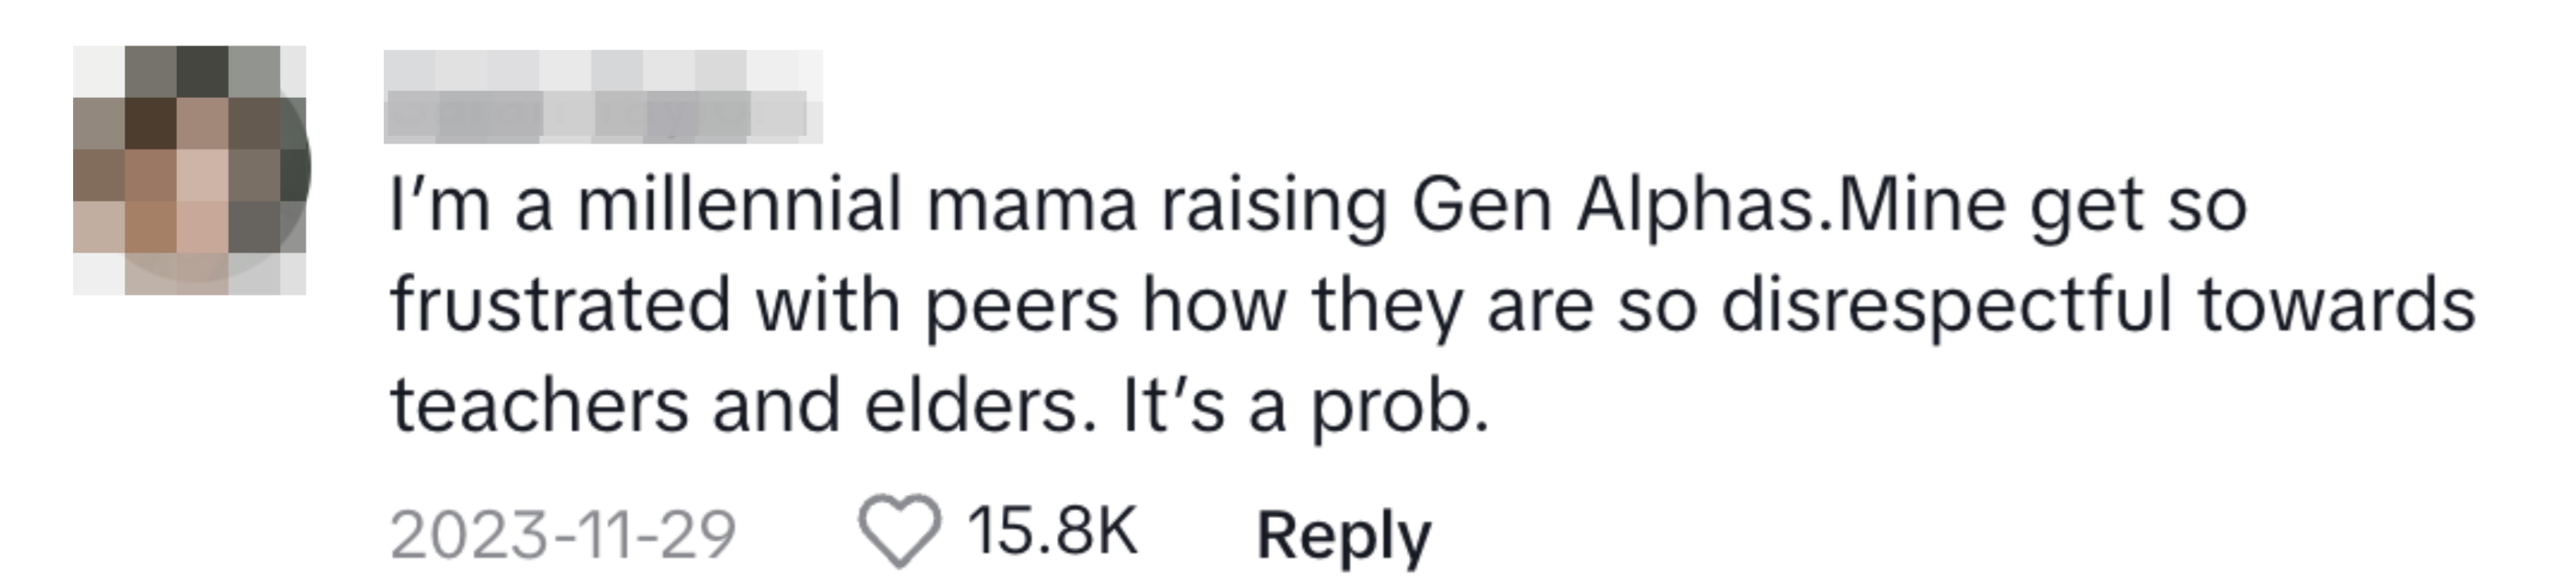 A millennial mom saying that Gen Alphas are disrespectful to teachers and elders